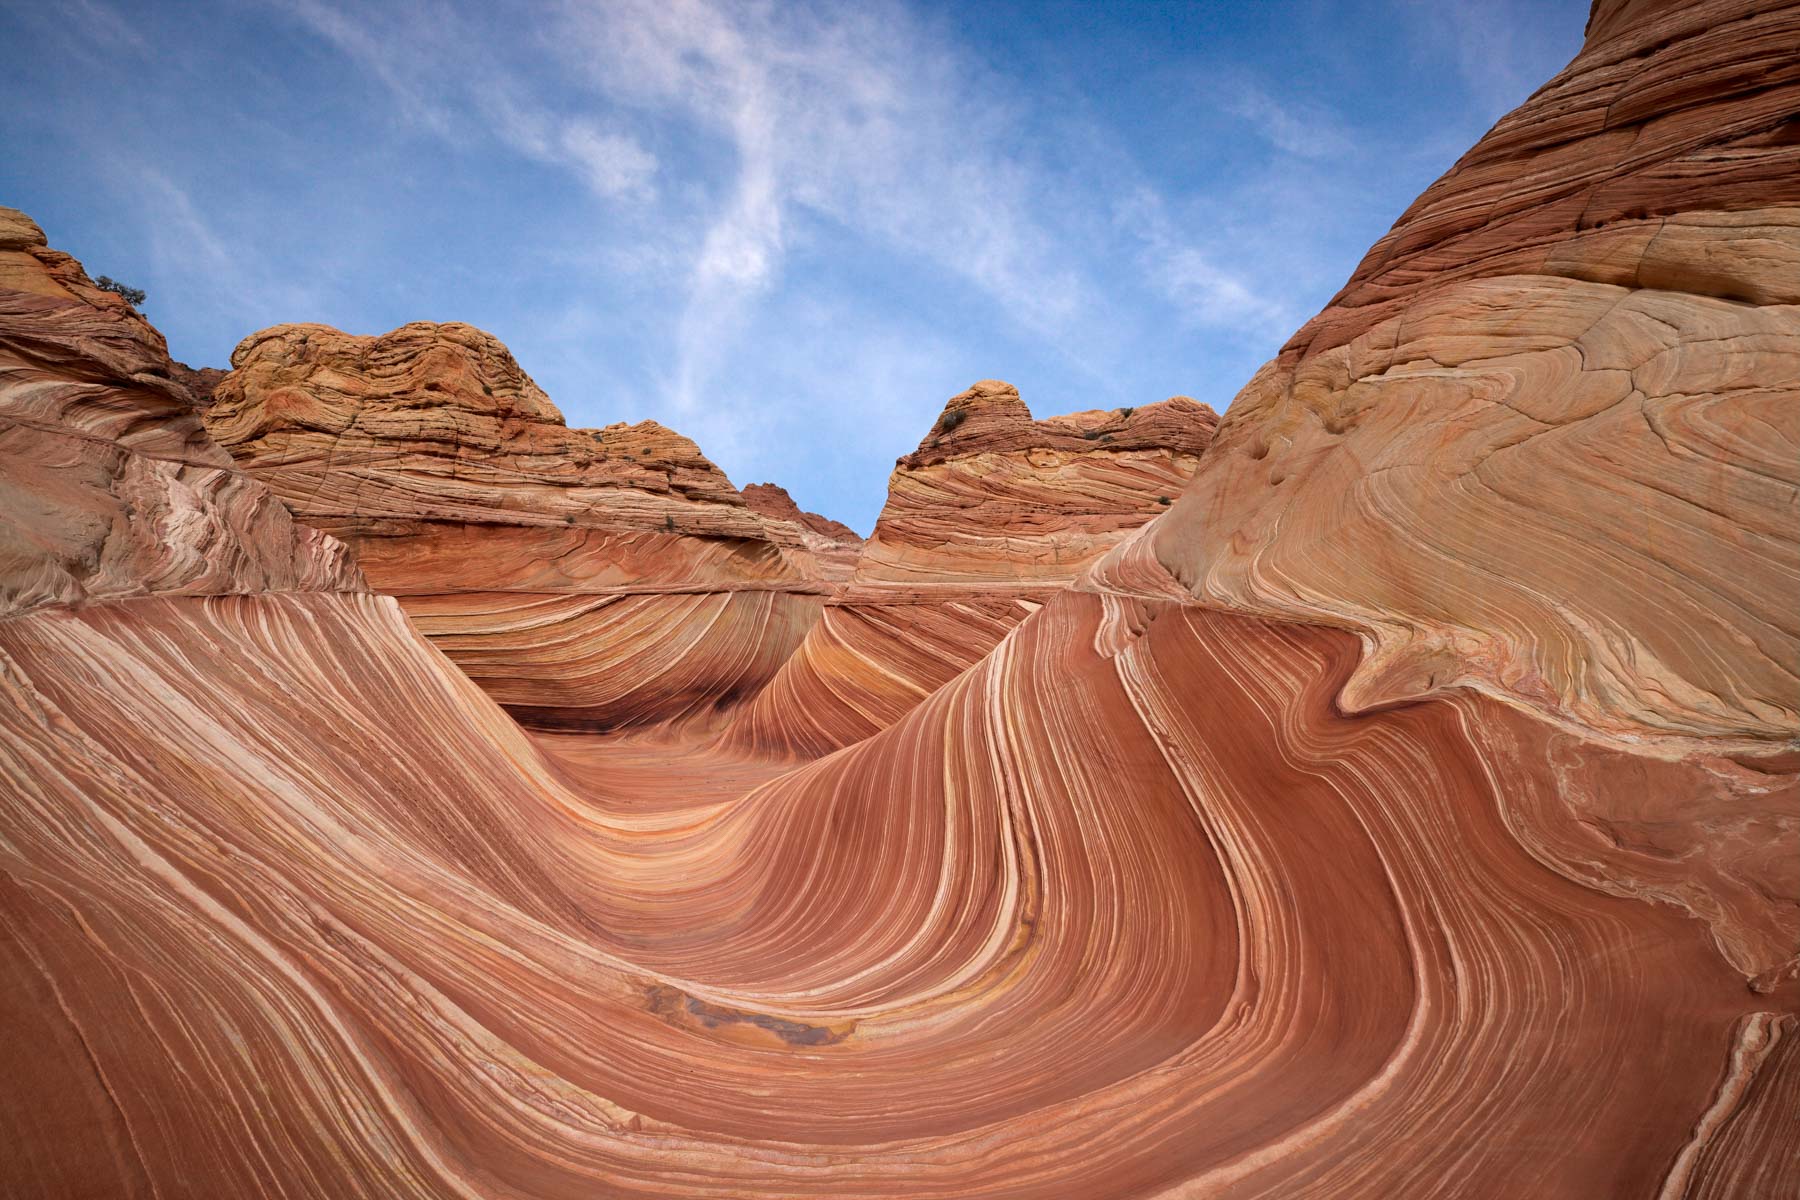 Wide-angle view of The Wave in Coyote Buttes North, Arizona